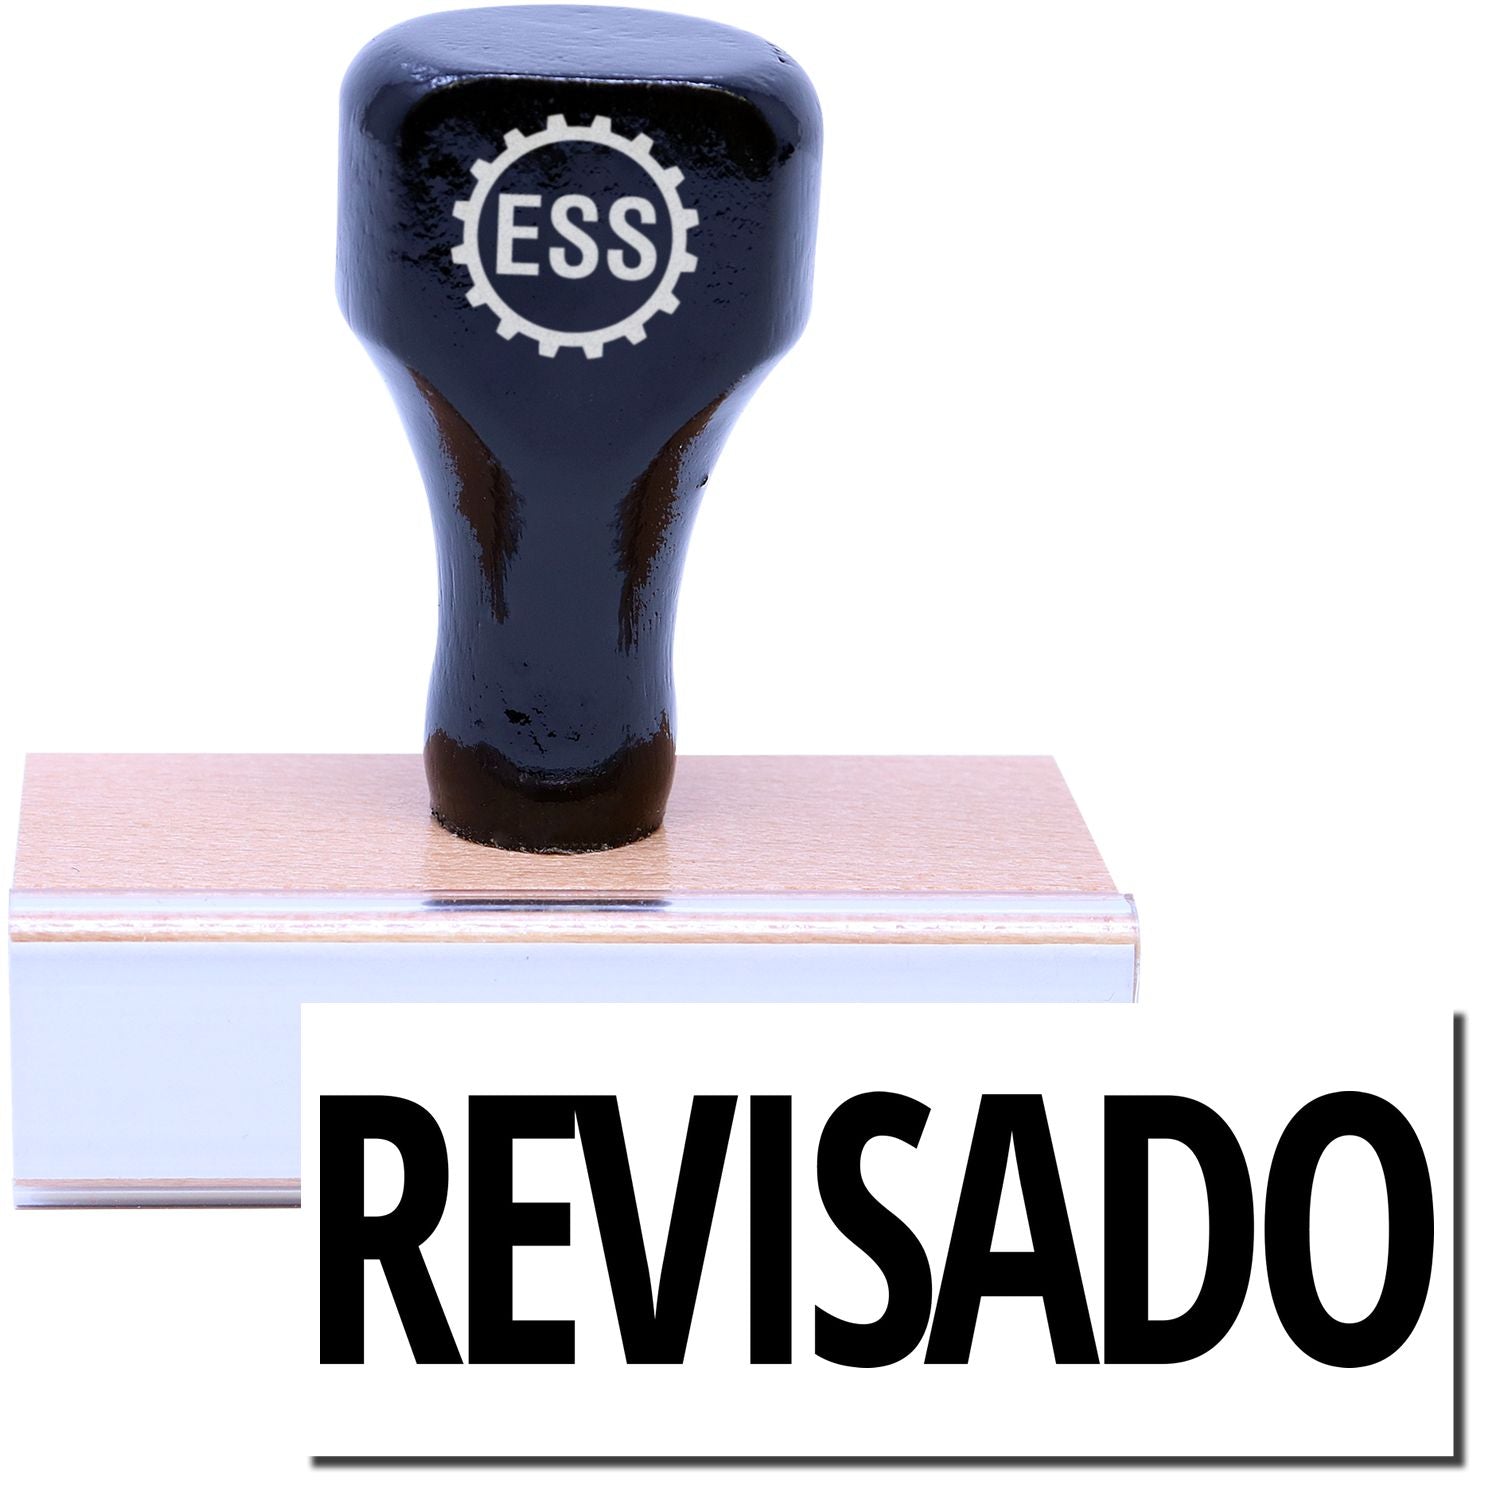 A stock office rubber stamp with a stamped image showing how the text "REVISADO" is displayed after stamping.